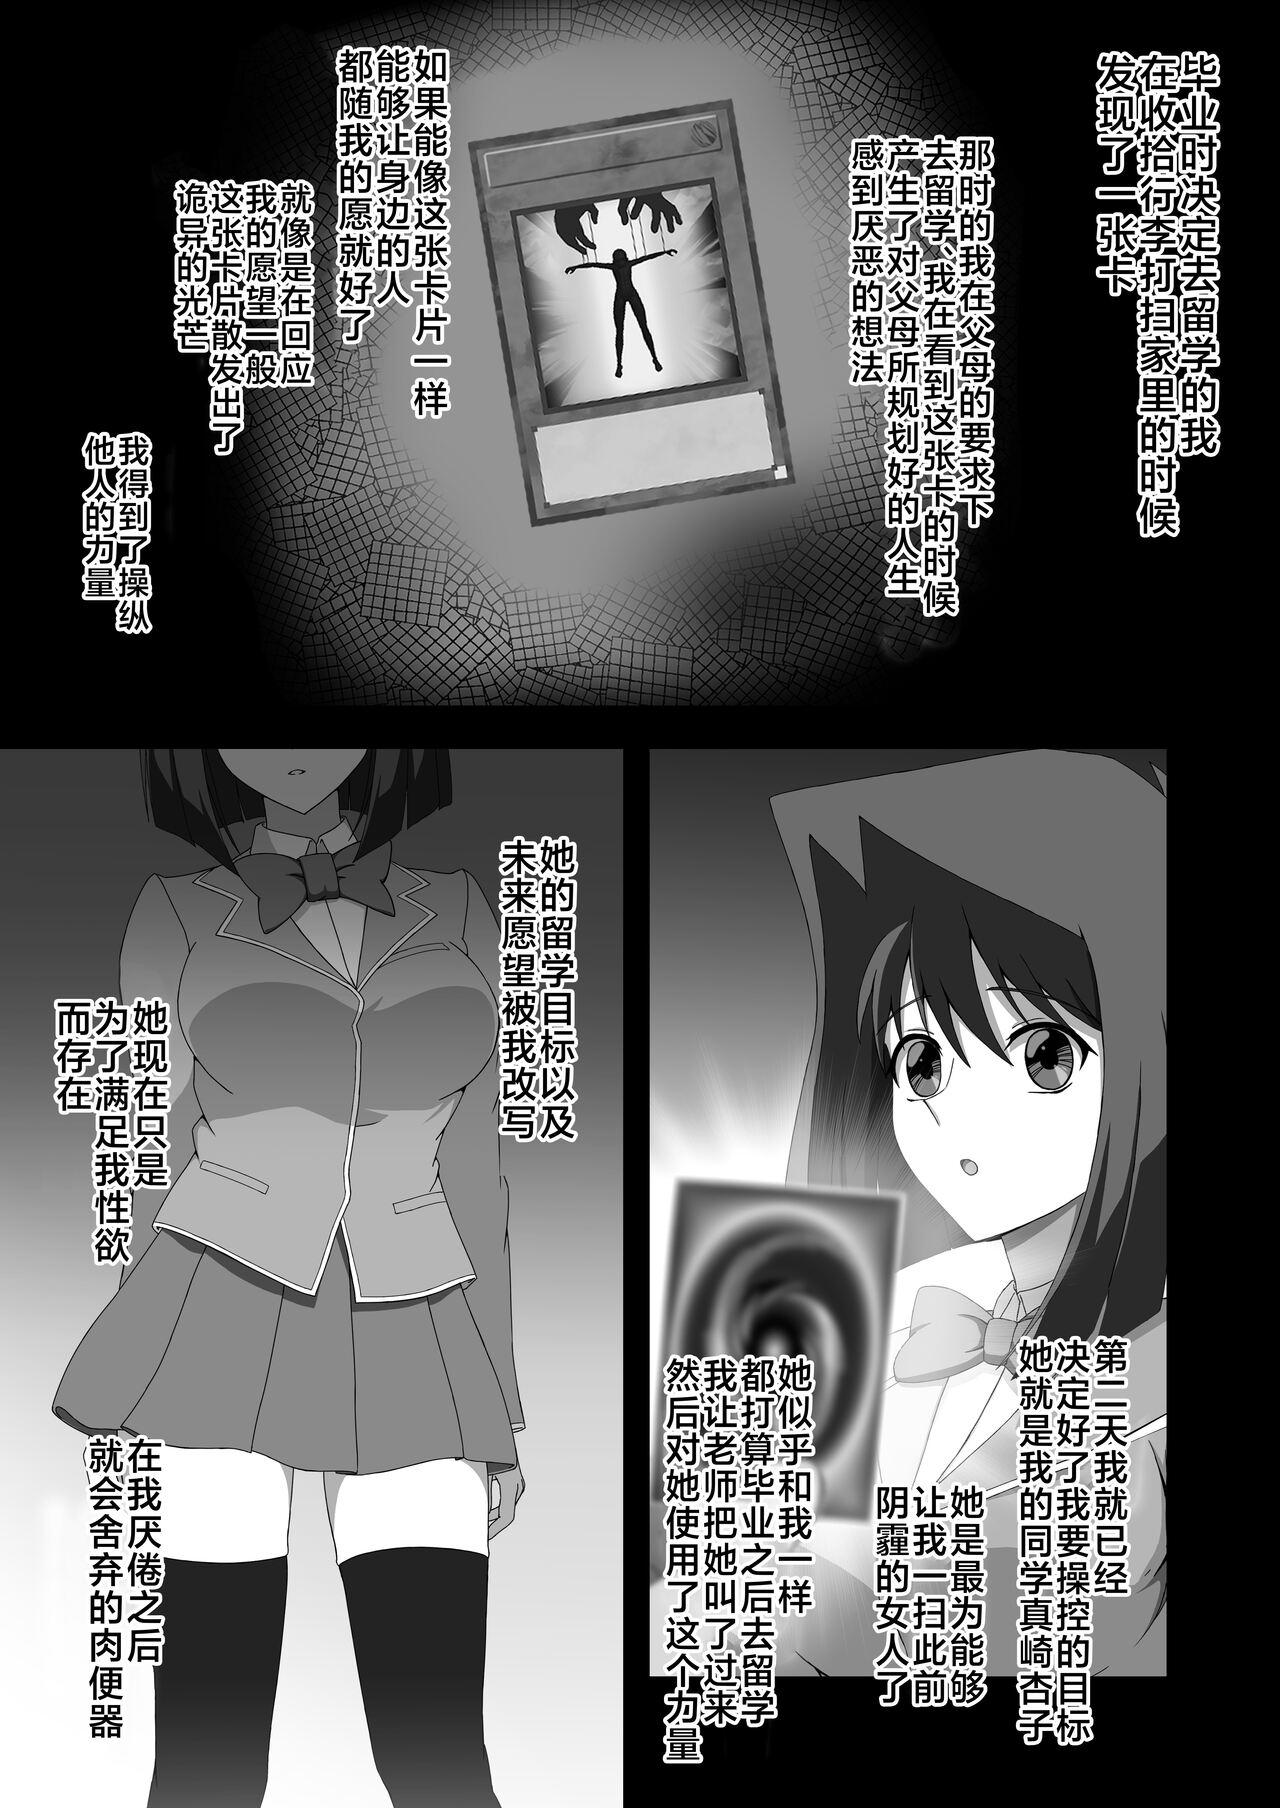 Naked Take control of the target - Yu-gi-oh Cuck - Page 6